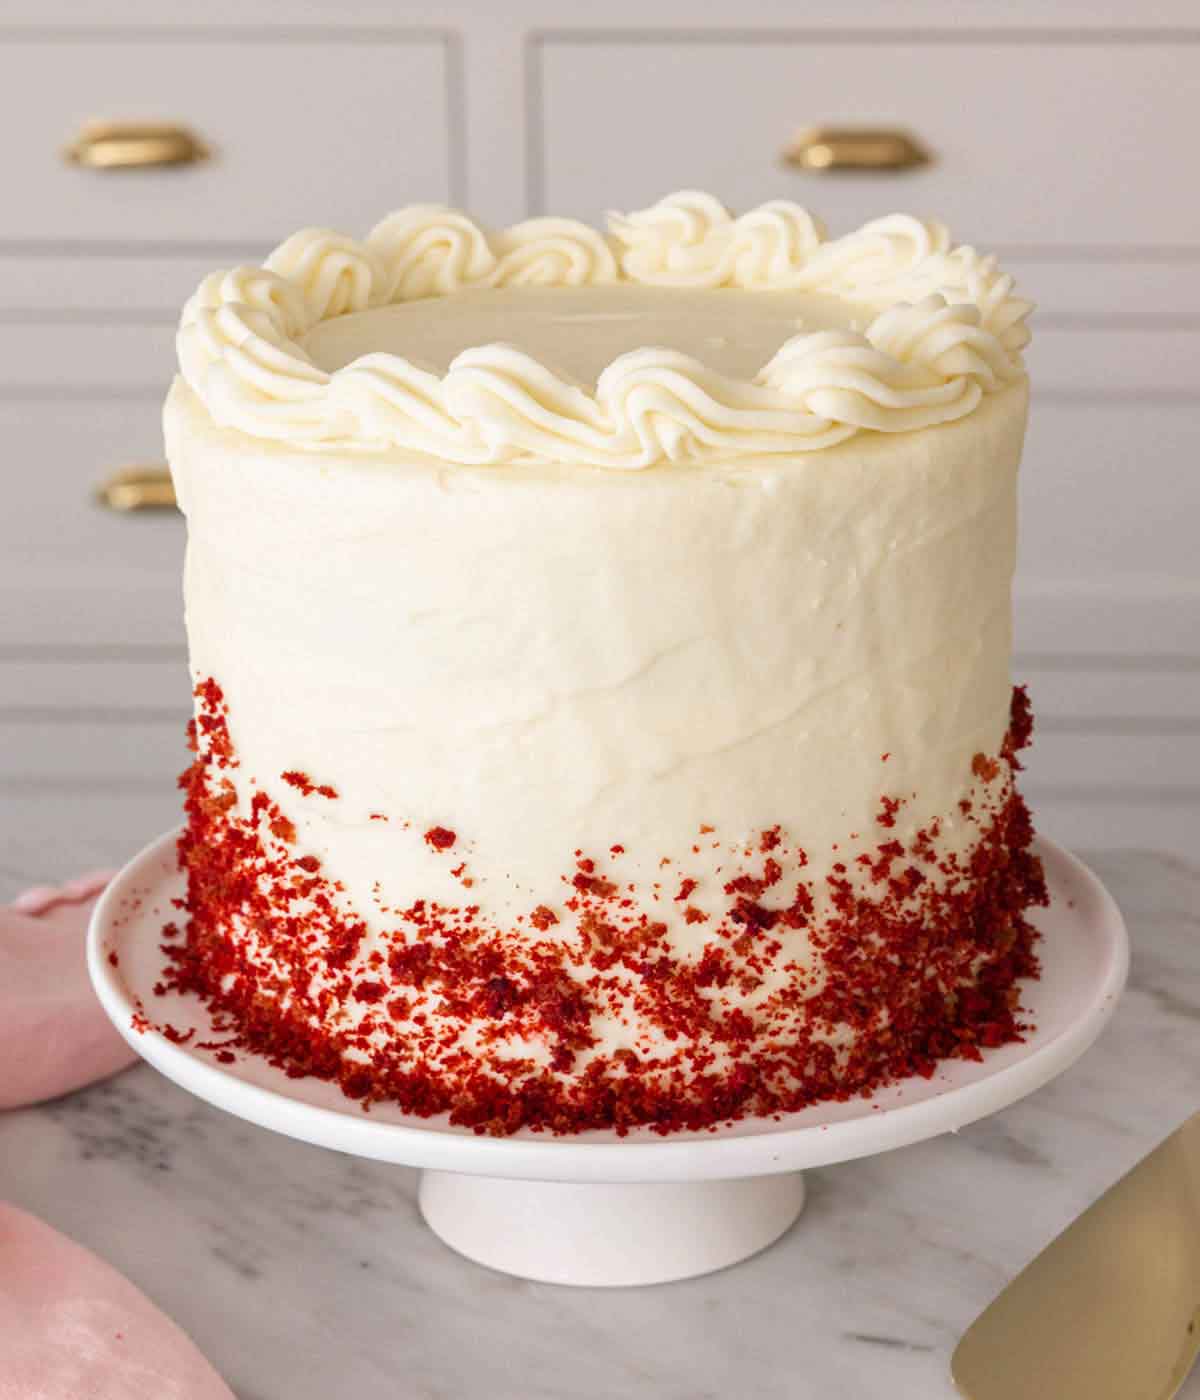 A red velvet cake on a cake stand with crumbled cake on the frosting.